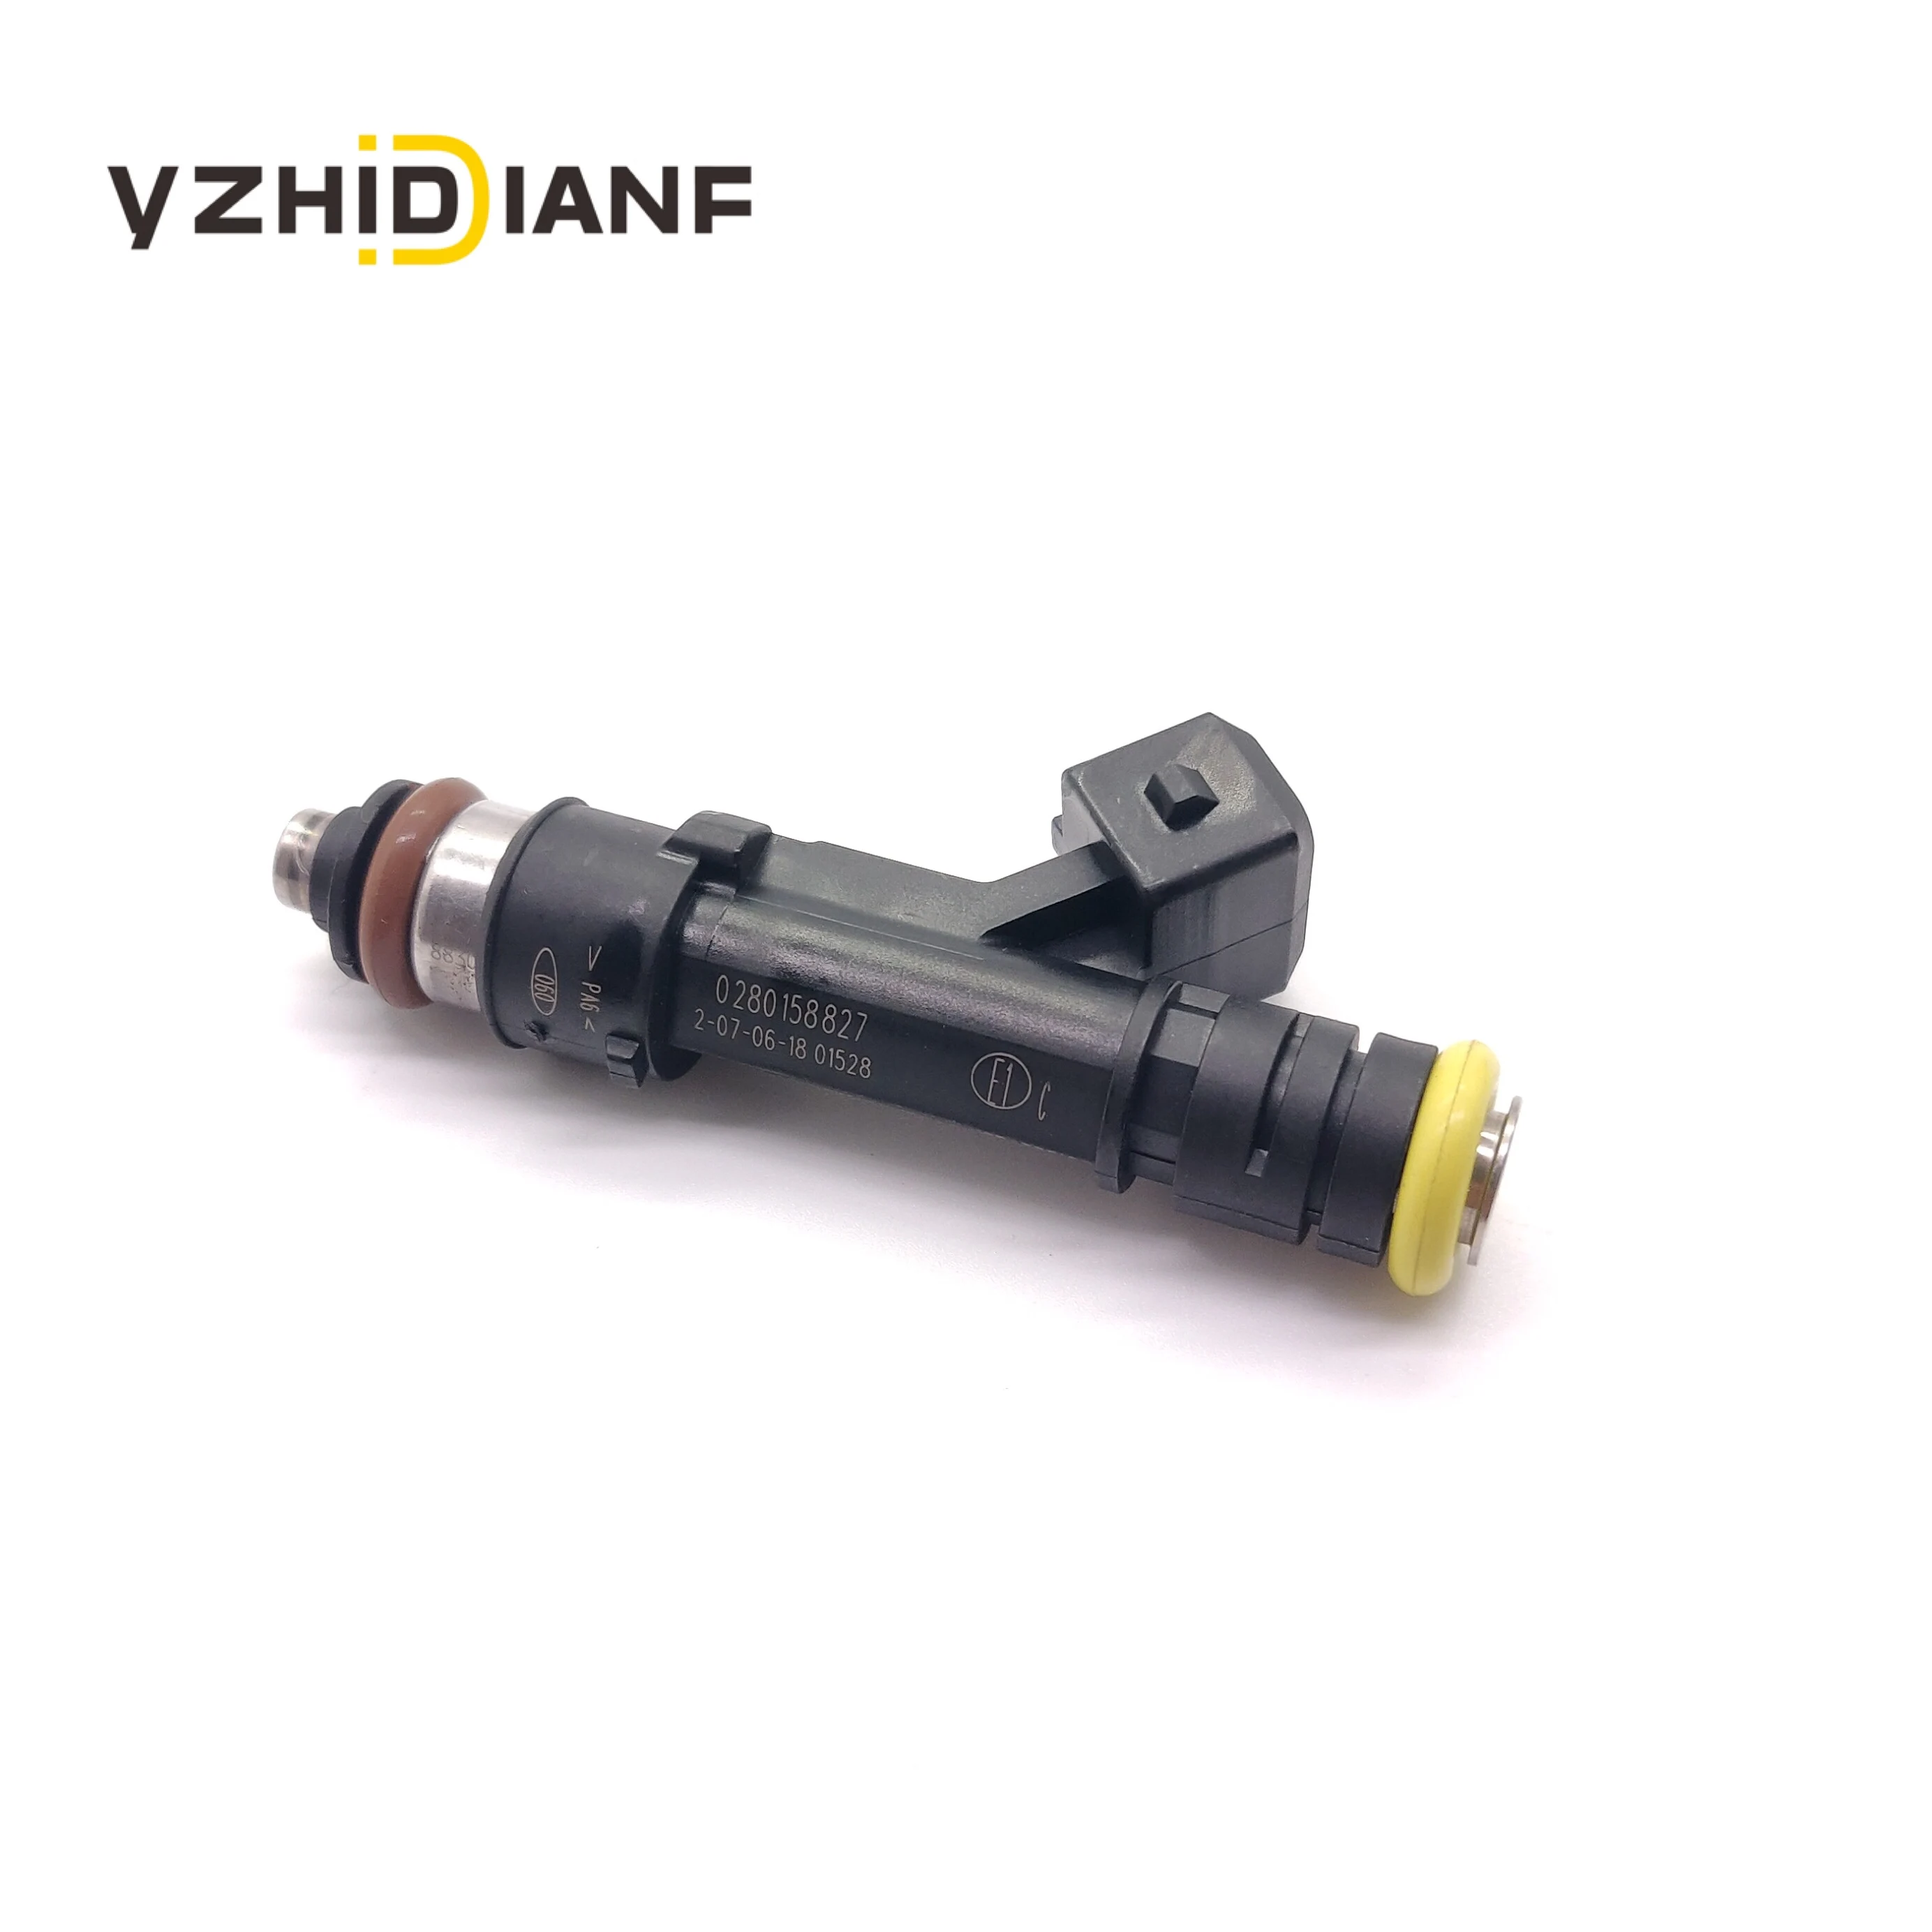 

1-6x Fuel Injector 1300cc for Fiat IVECO-OPEL VAUXHALL V--W - Car Engine Nozzle Injector Petrol Gas Injection Valve 0280158827